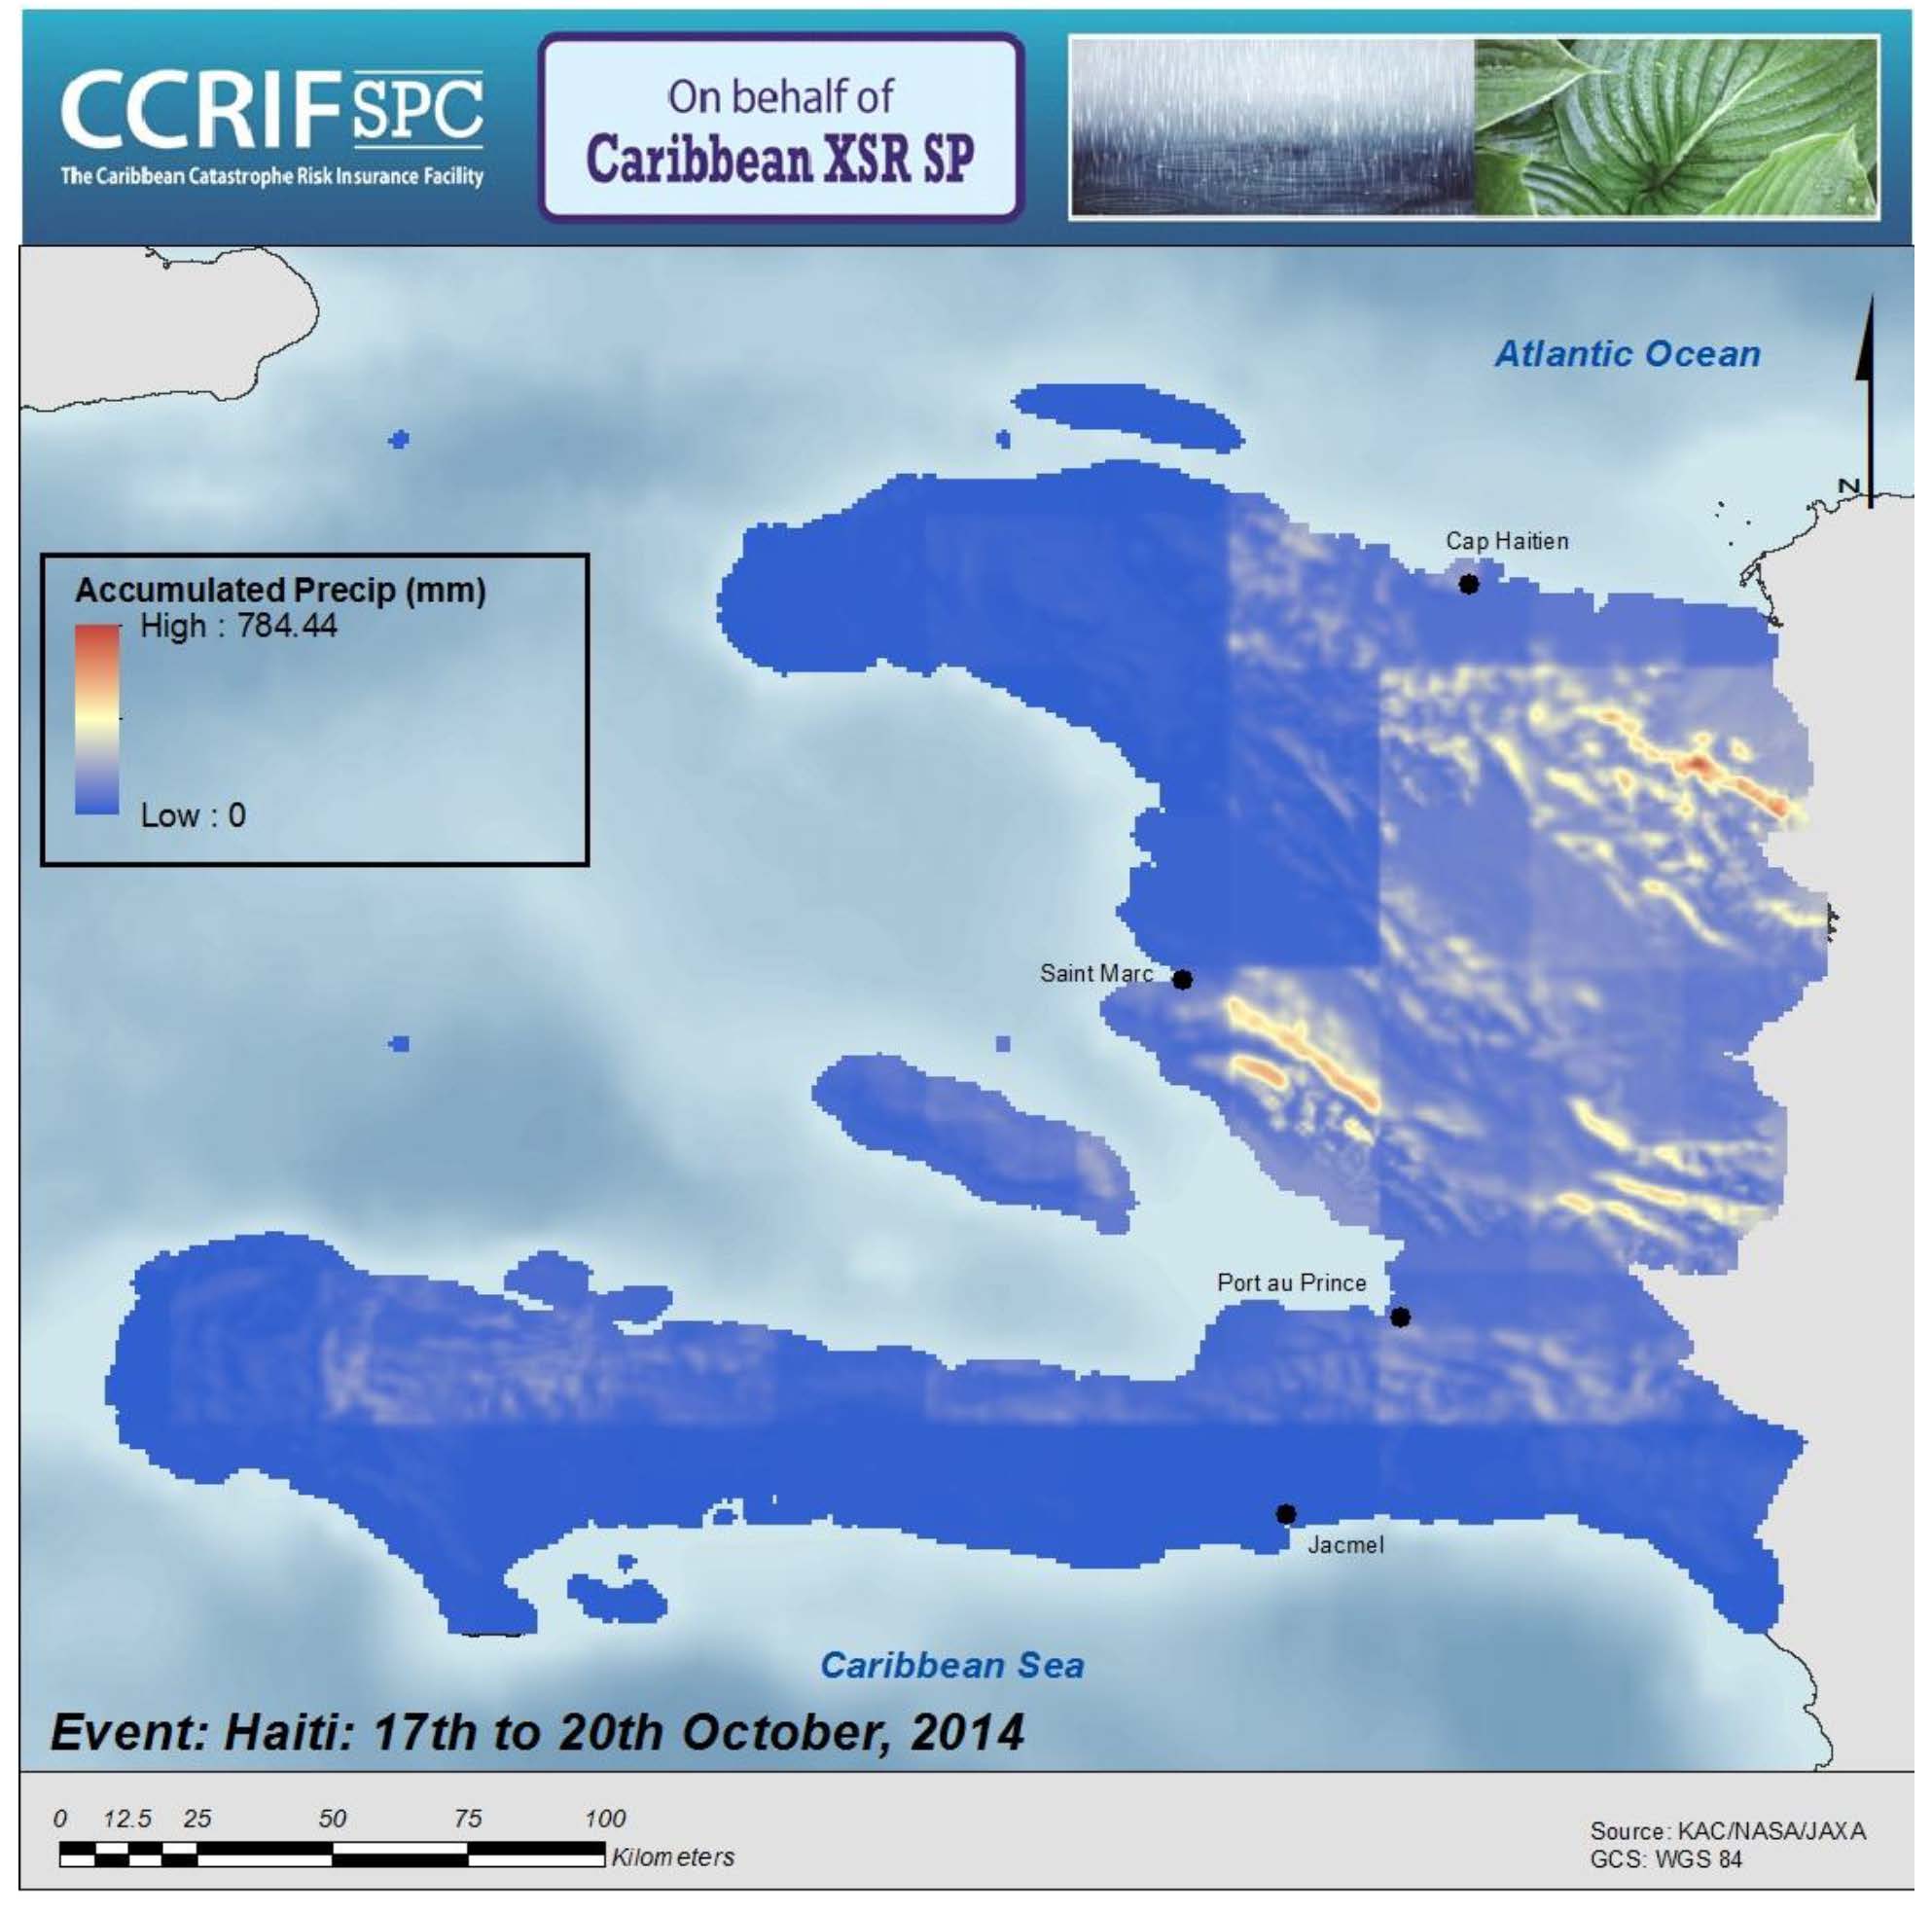 Event Briefing - Excess Rainfall - Covered Area Rainfall Event - Haiti